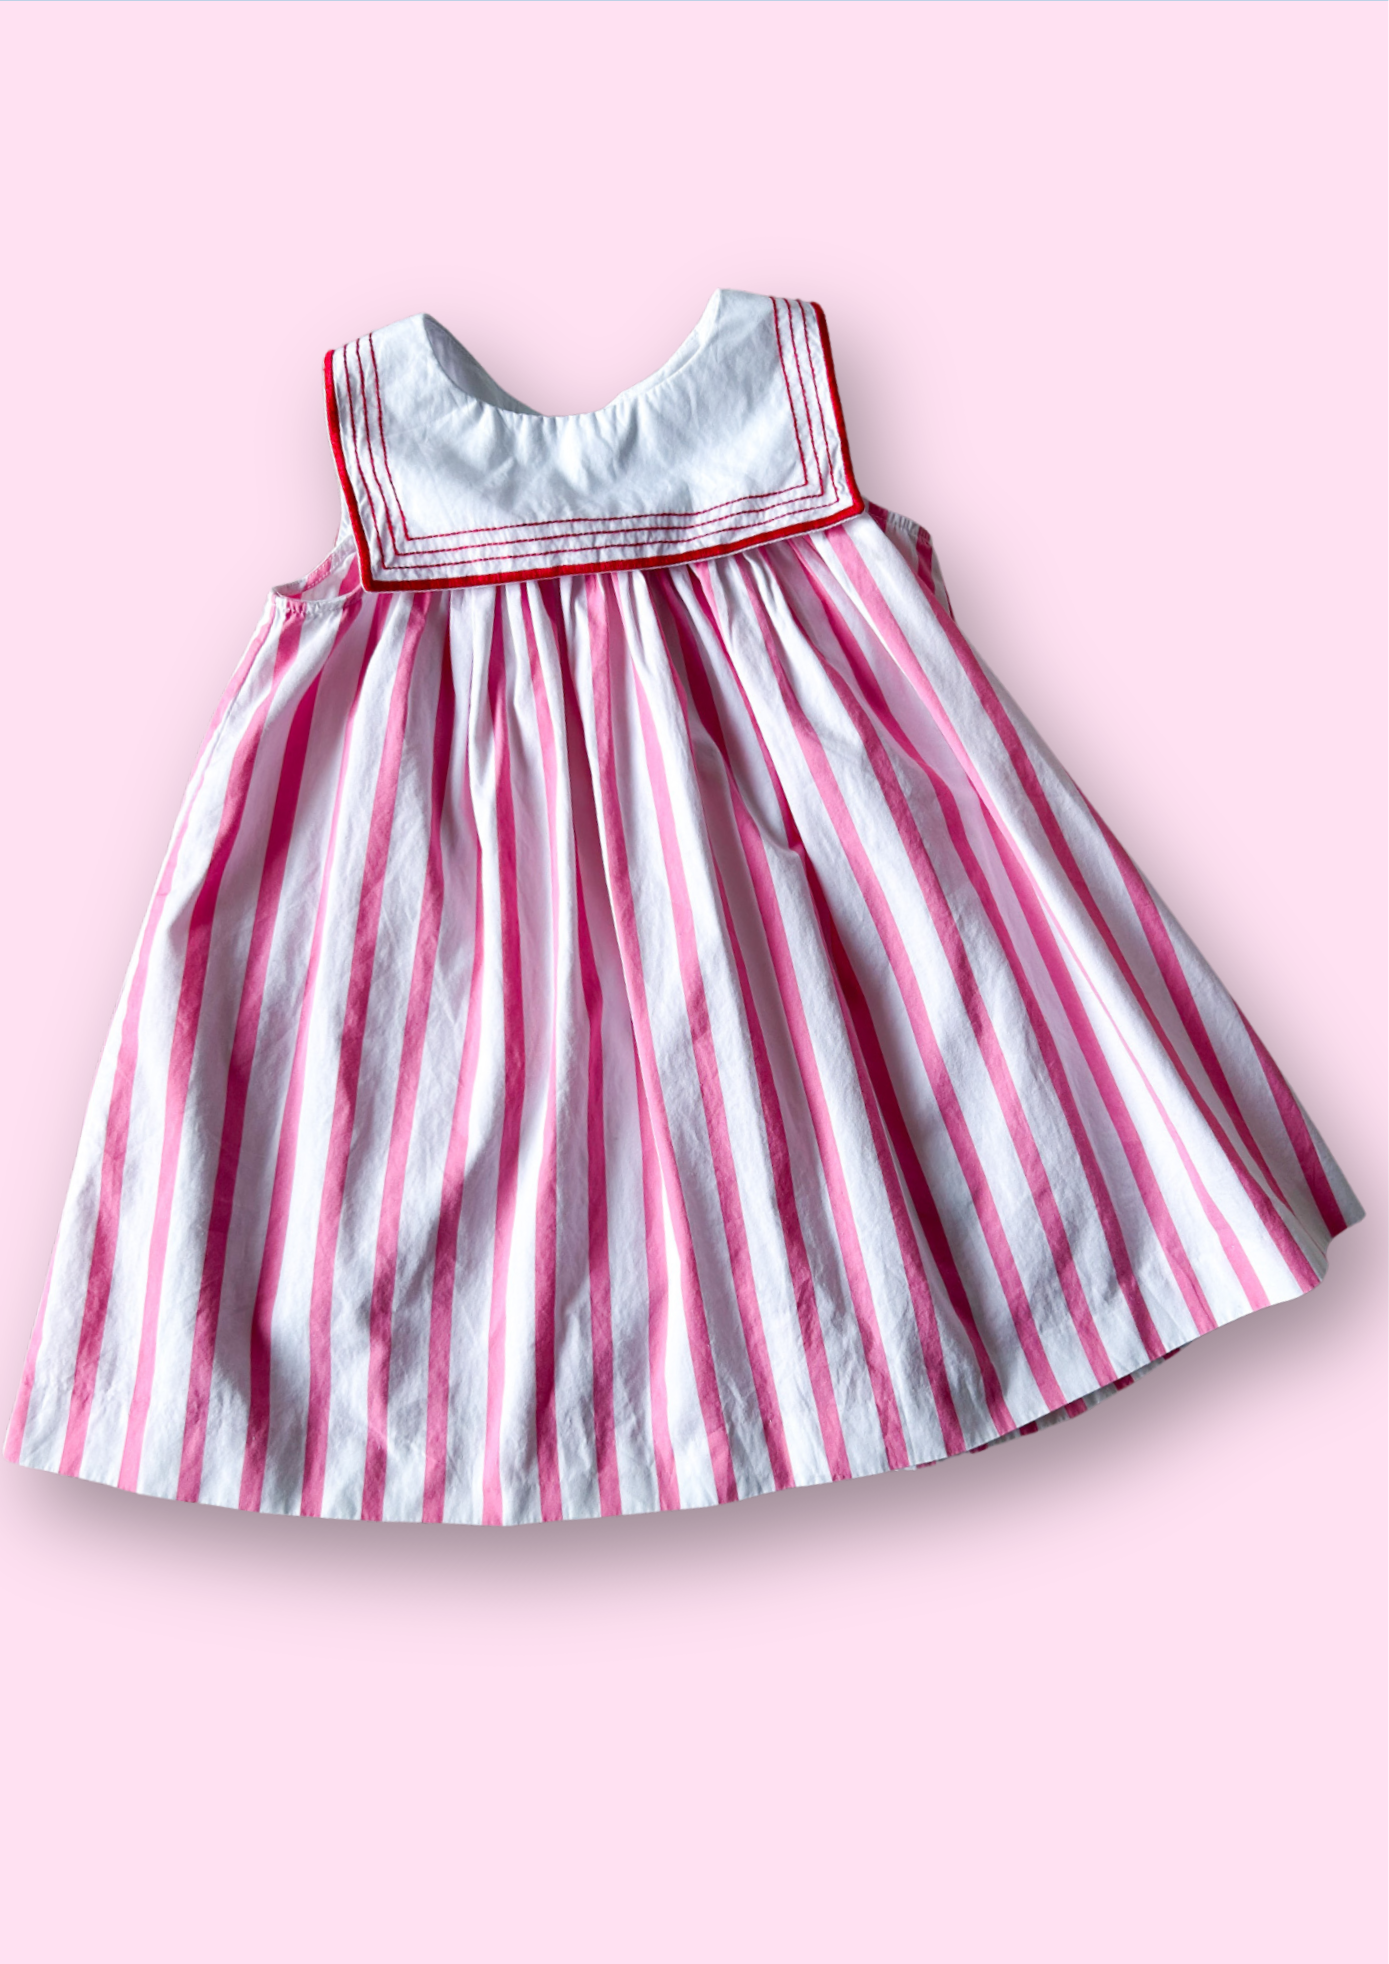 Vintage Stripe Sailor Collar Dress, approx 2-3 years